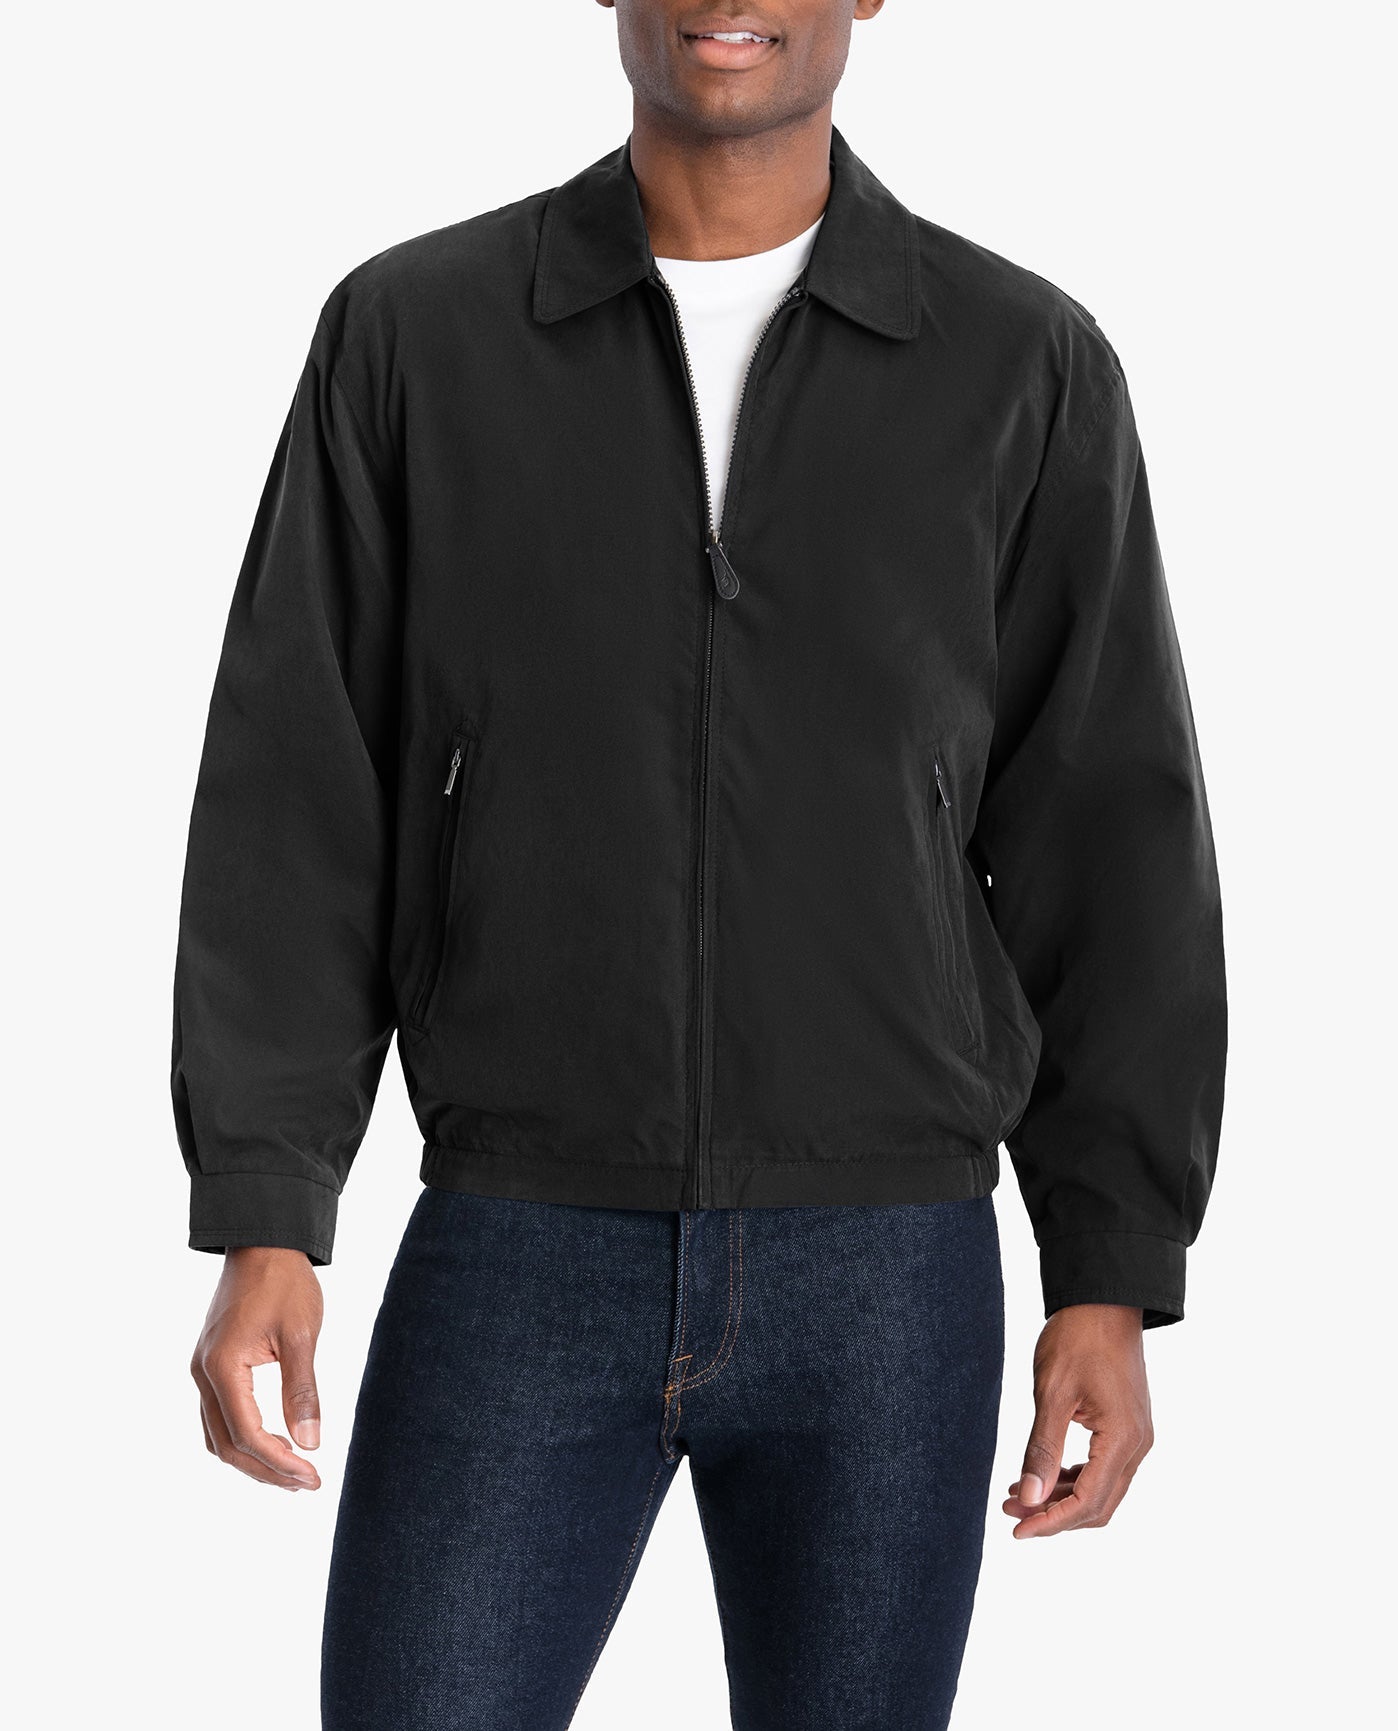 FRONT VIEW OF TALL LIGHT WEIGHT ZIP FRONT GOLF JACKET | BLACK